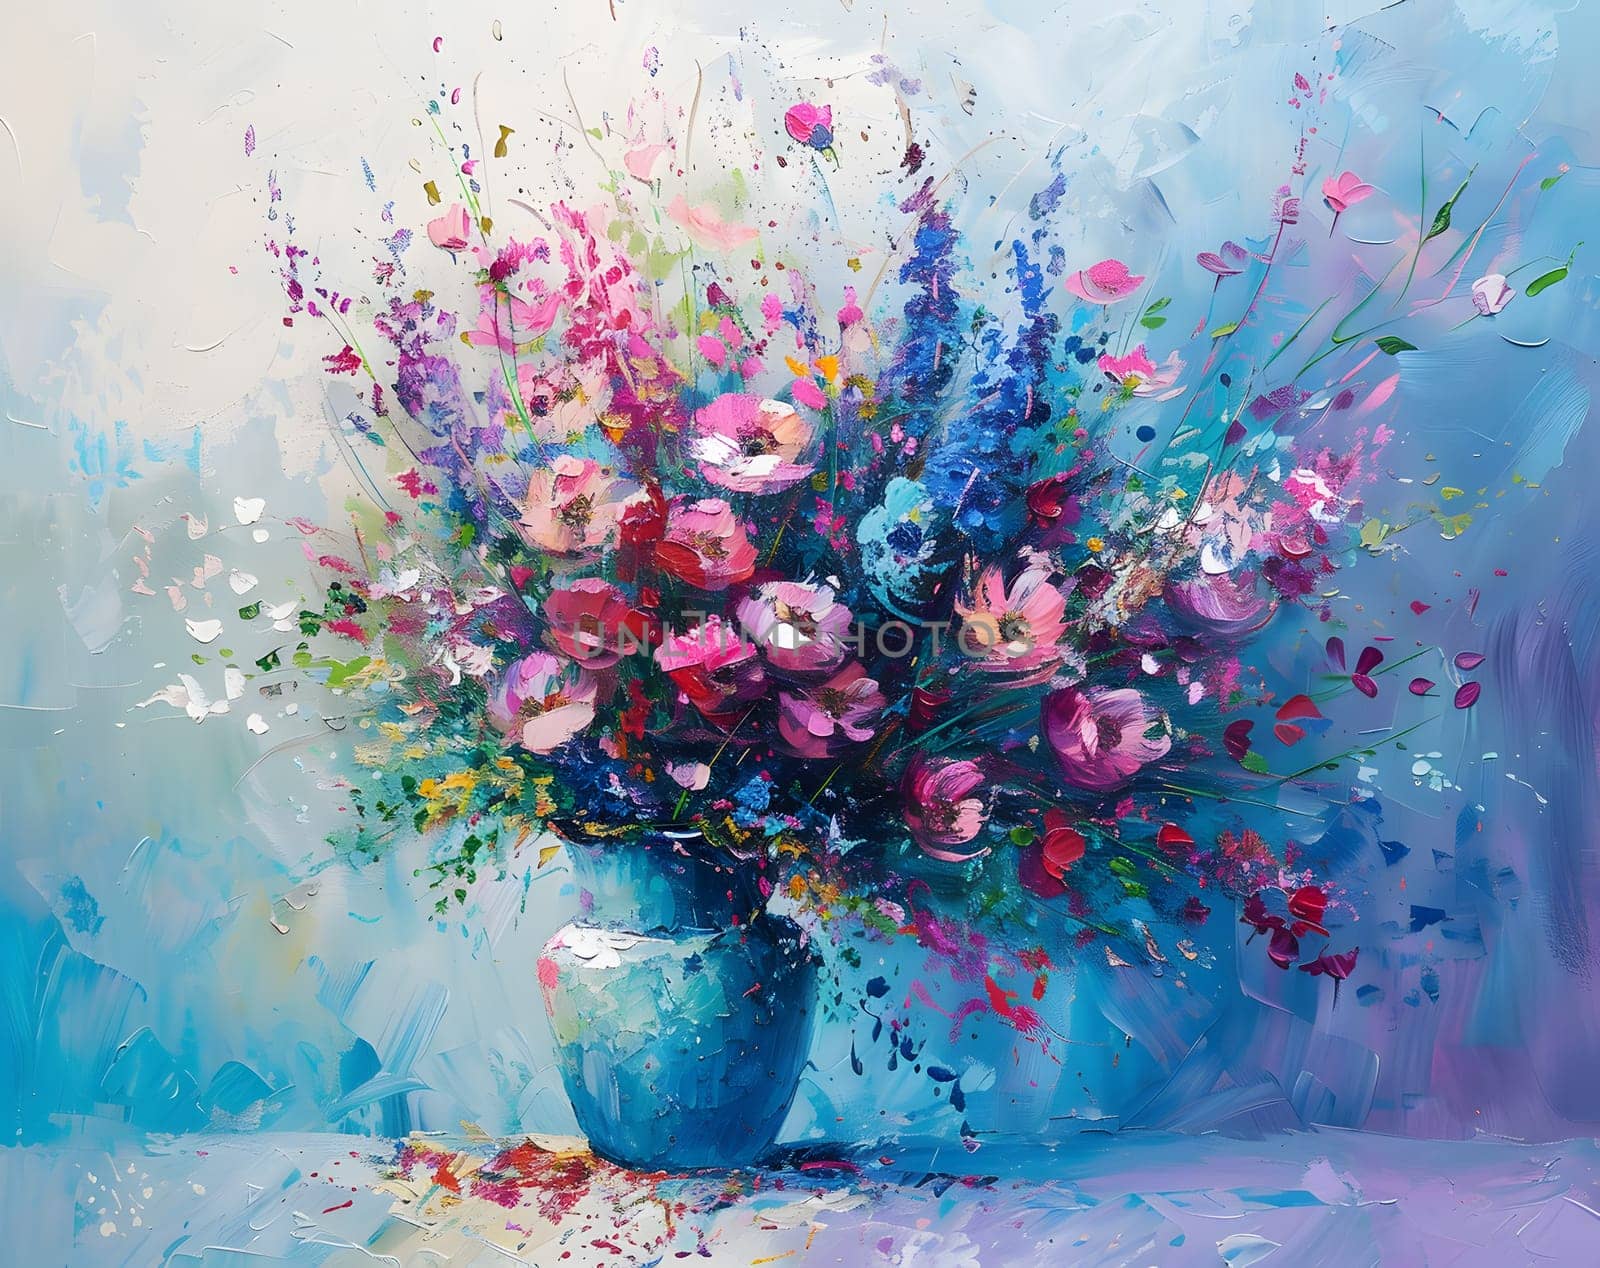 An artistic depiction of colorful flowers in a blue vase resting on a table, showcasing the beauty of nature through paint and liquid strokes